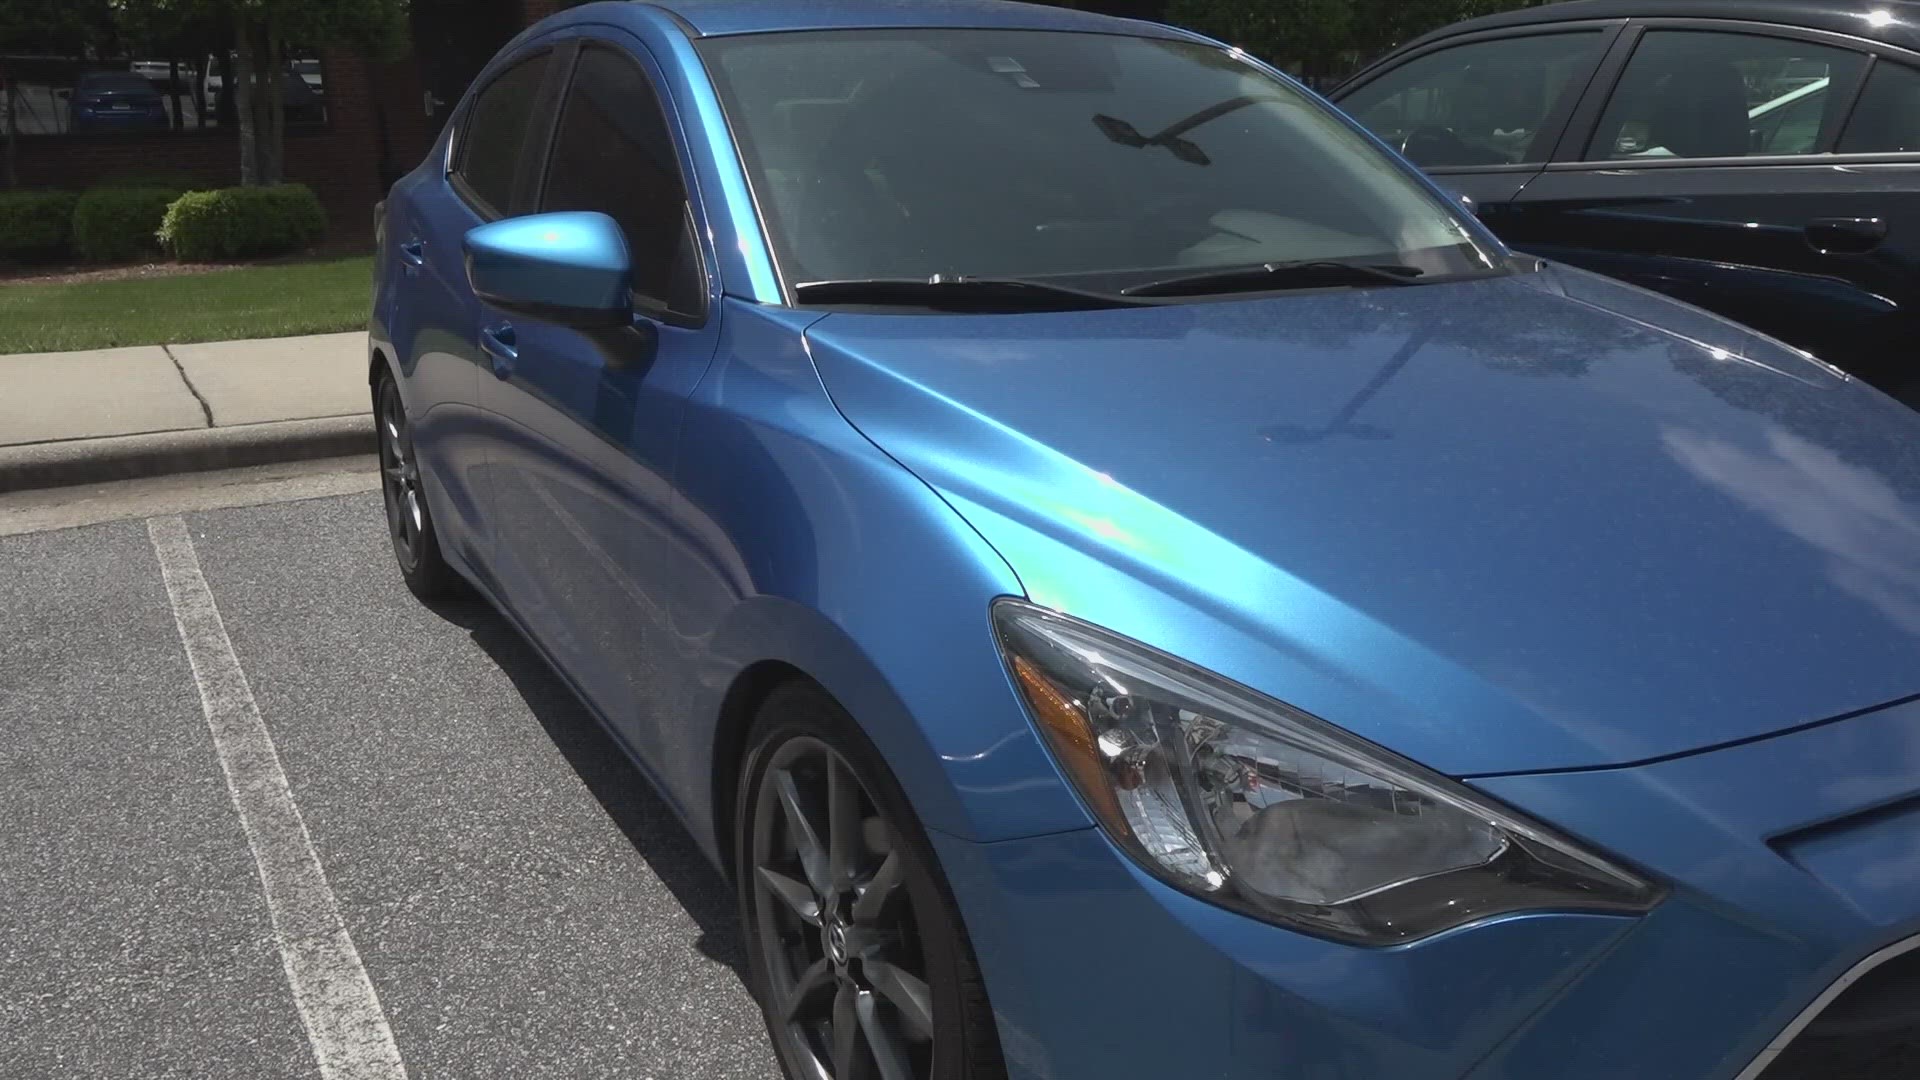 Woman buys a used car in Tennessee and gets stuck with a big payment with no help.